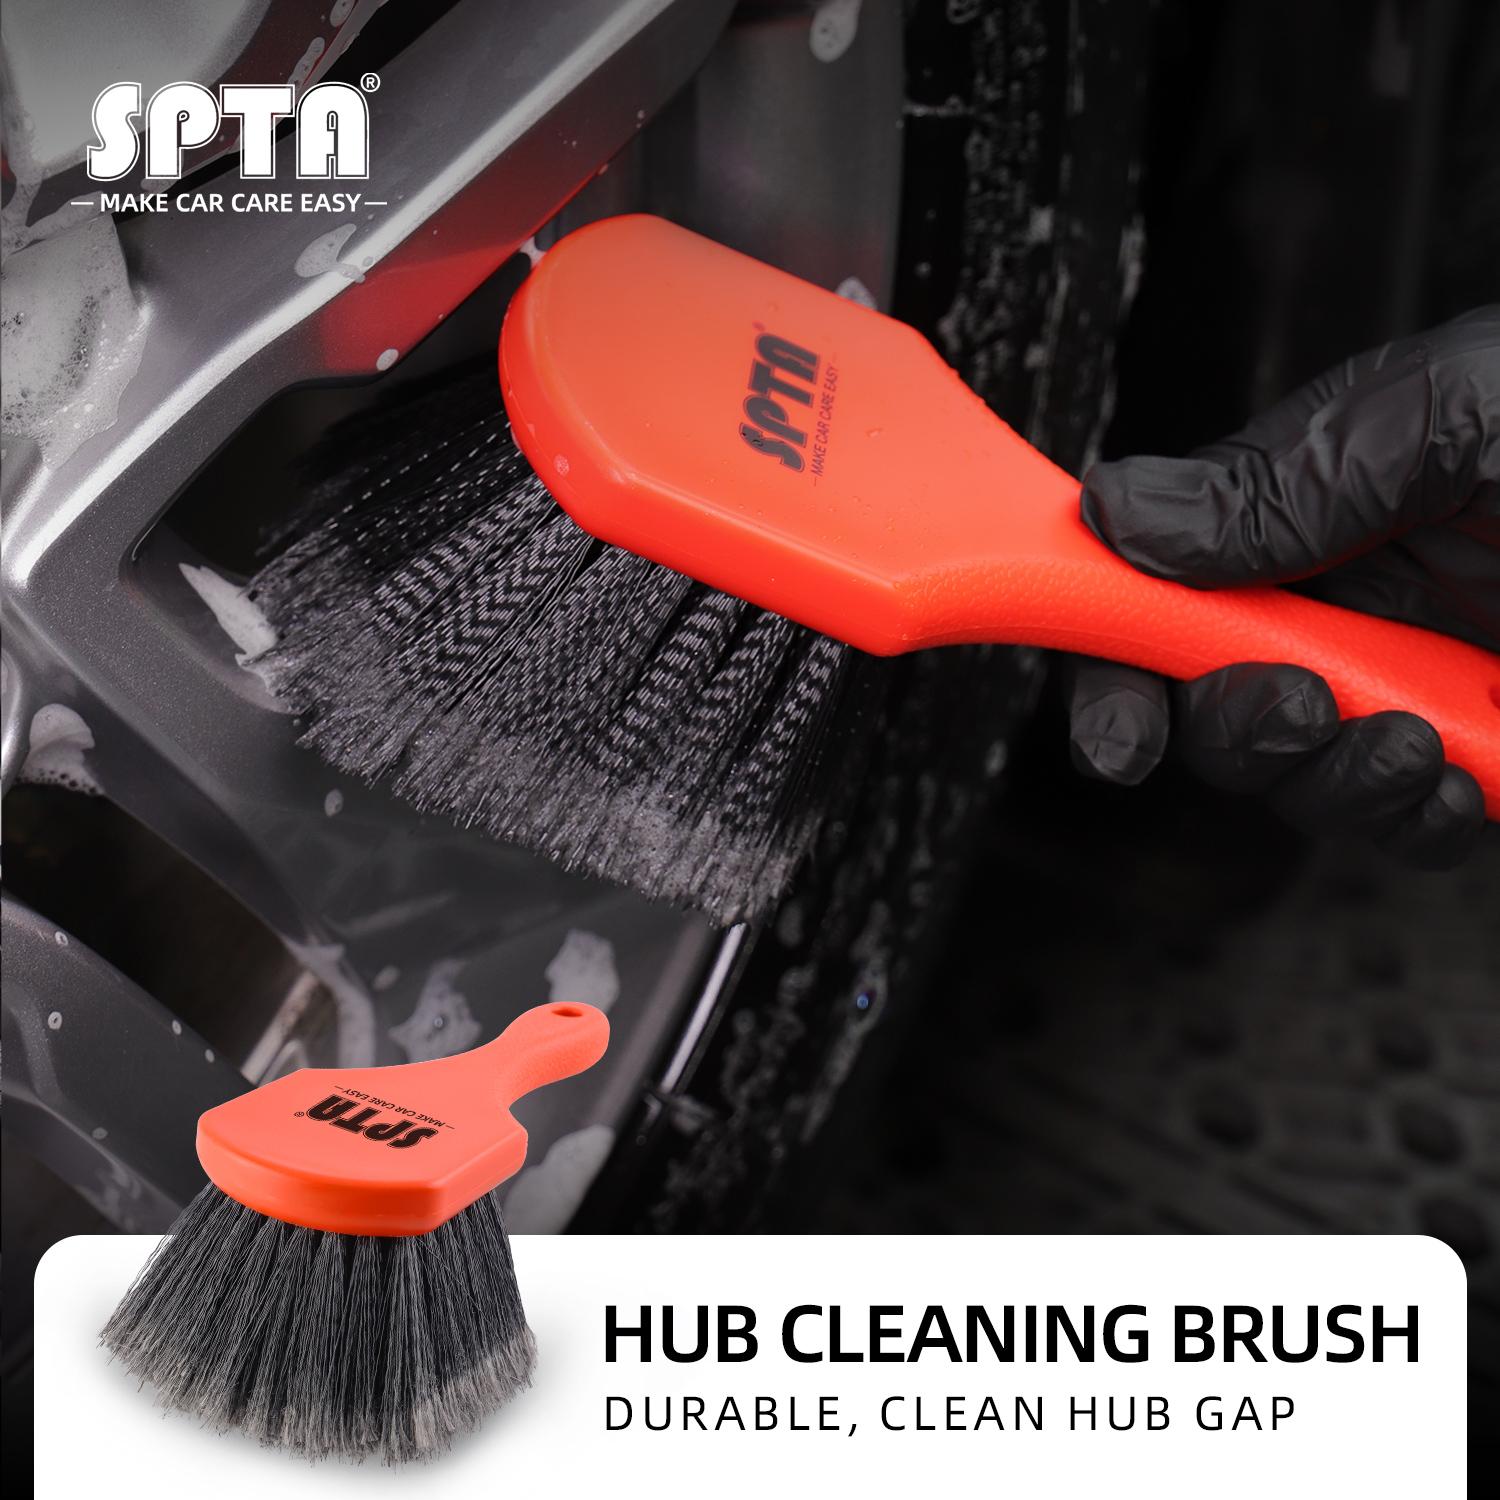 SPTA Wheel & Tire Brush, Soft Bristle Car Wash Brush for Car Rim, Interior & Exterior Surface Cleaning Brush, Clean Tires and Release Dirt, Soft